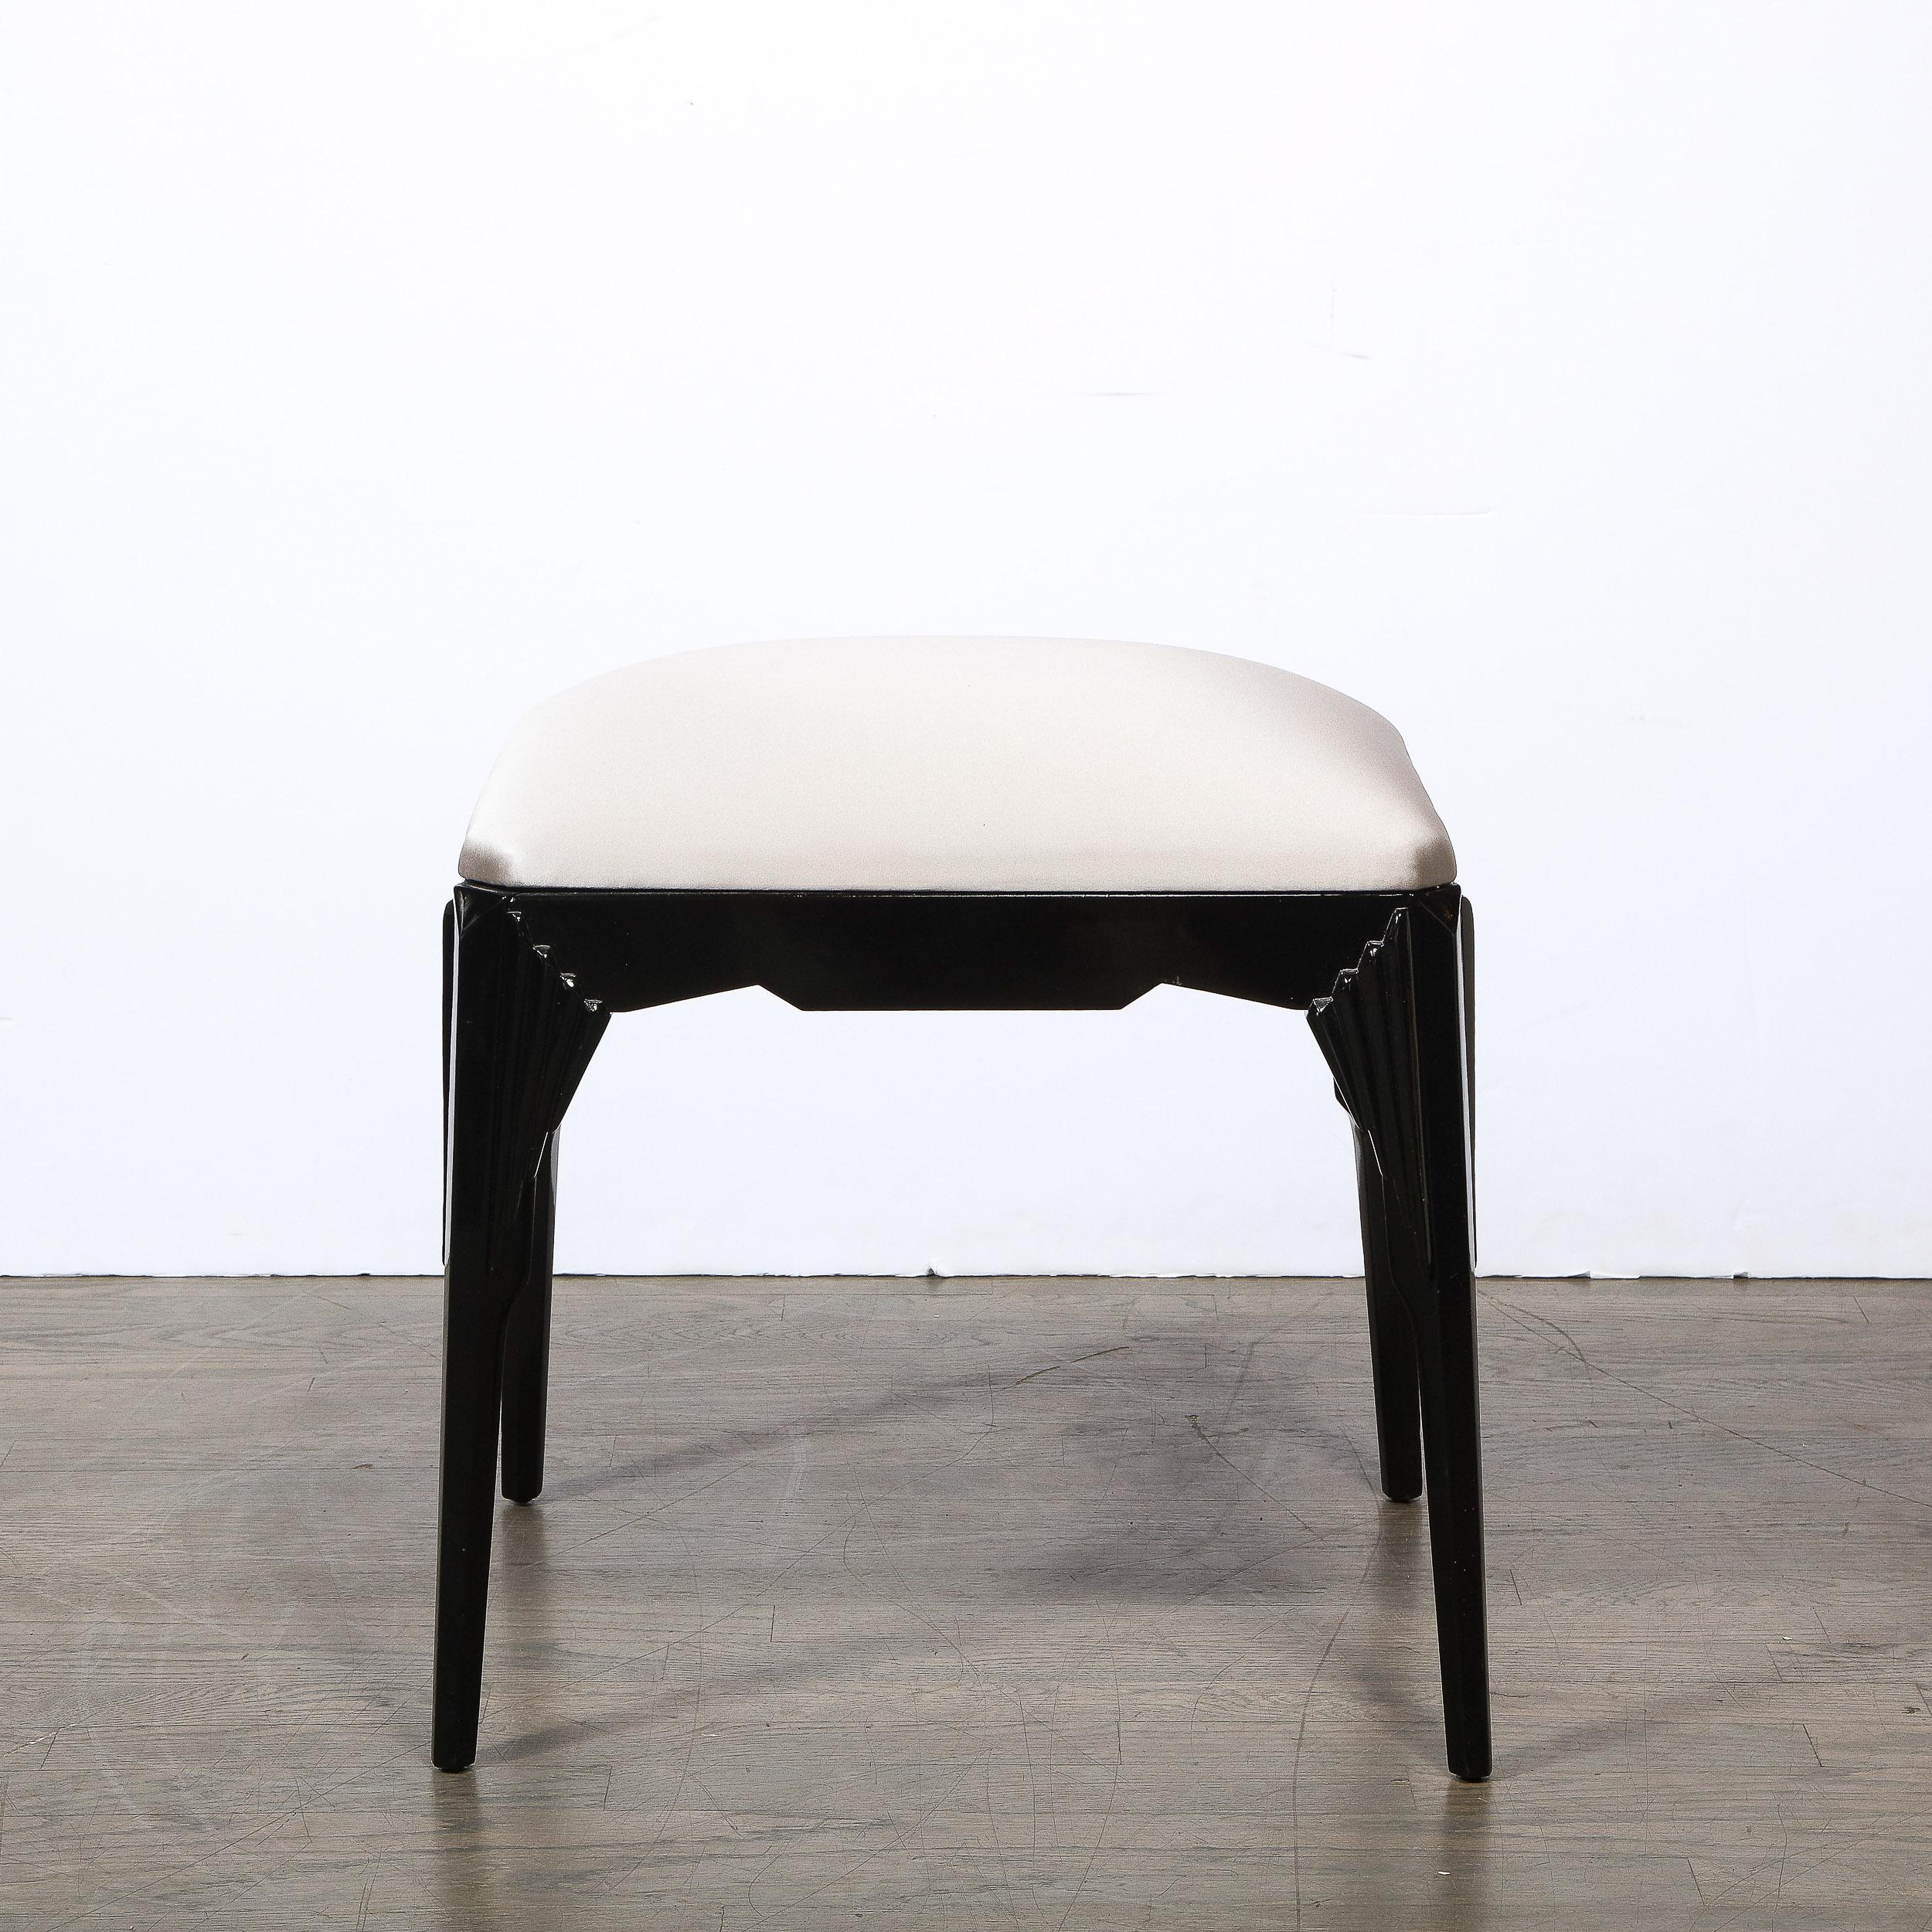 This stunning Art Deco Skyscraper style stool was realized in the United States circa 1935. It feature subtly splayed legs with cubist skyscraper style detailing- composed of adjoining tiered and staggered geometric forms- at each corner connected